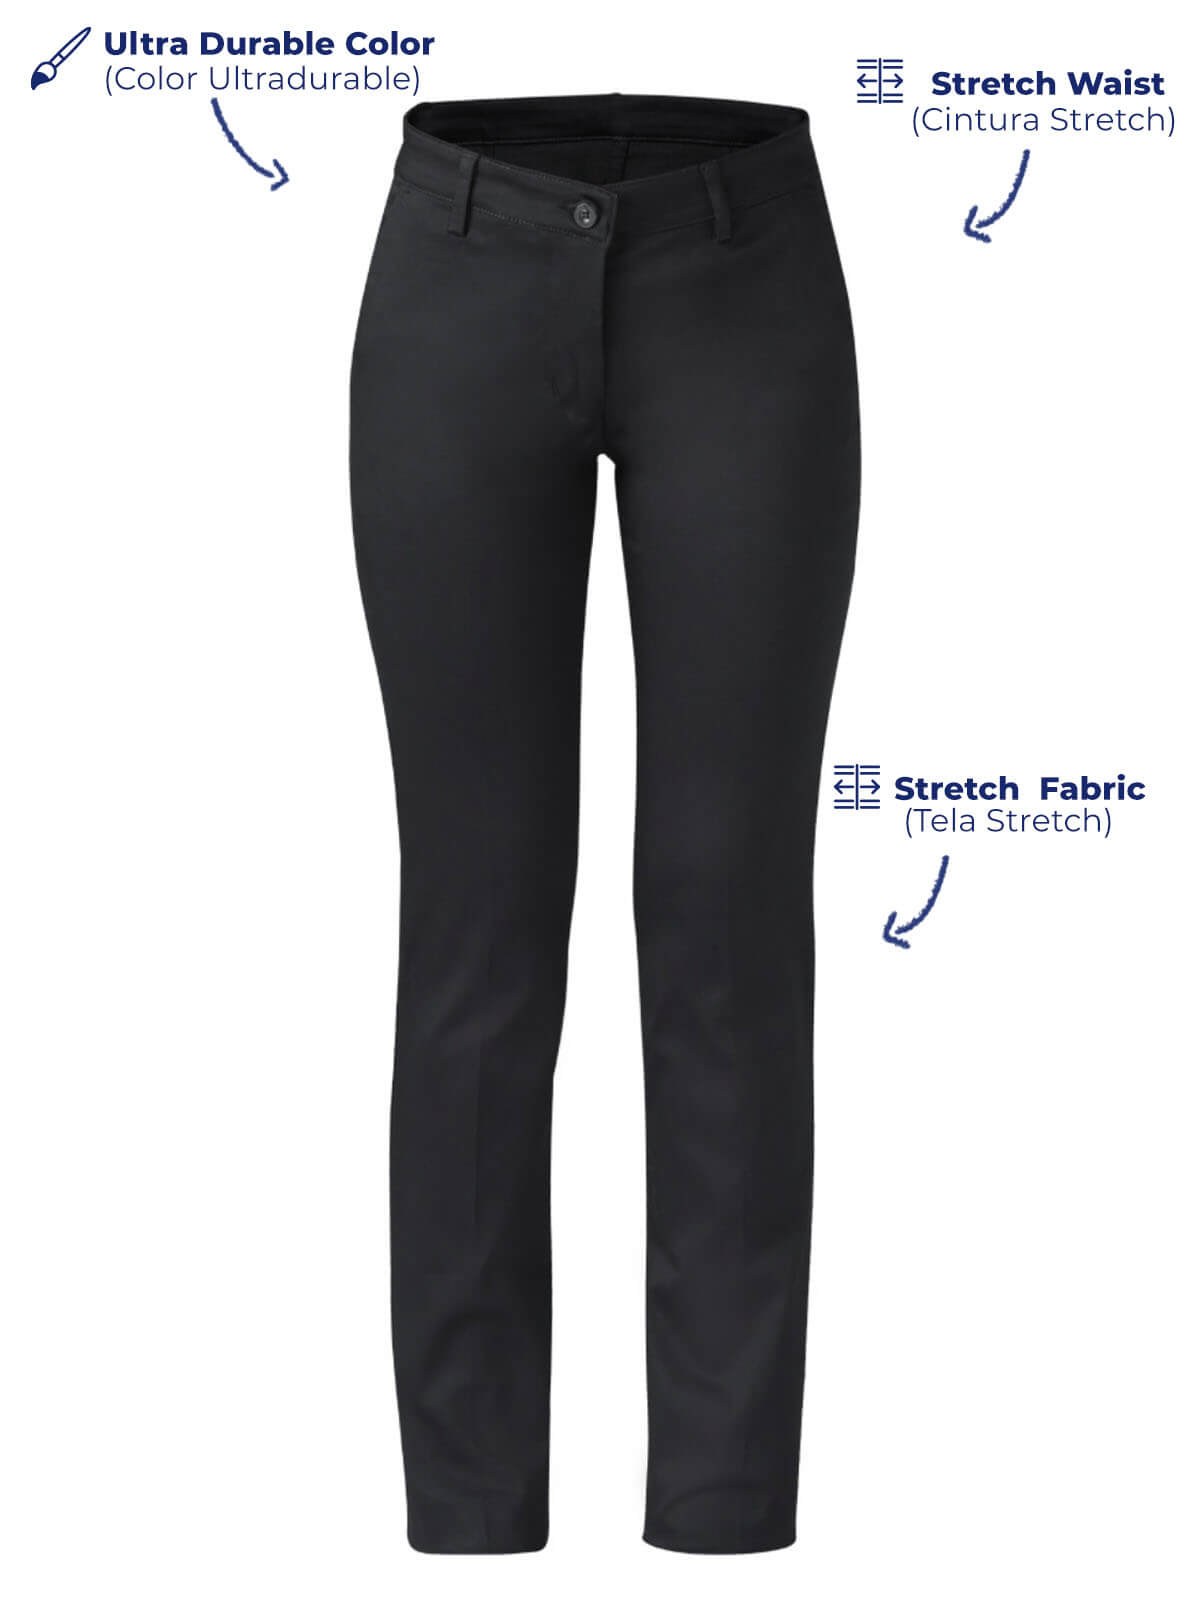 Black executive pants for women front view